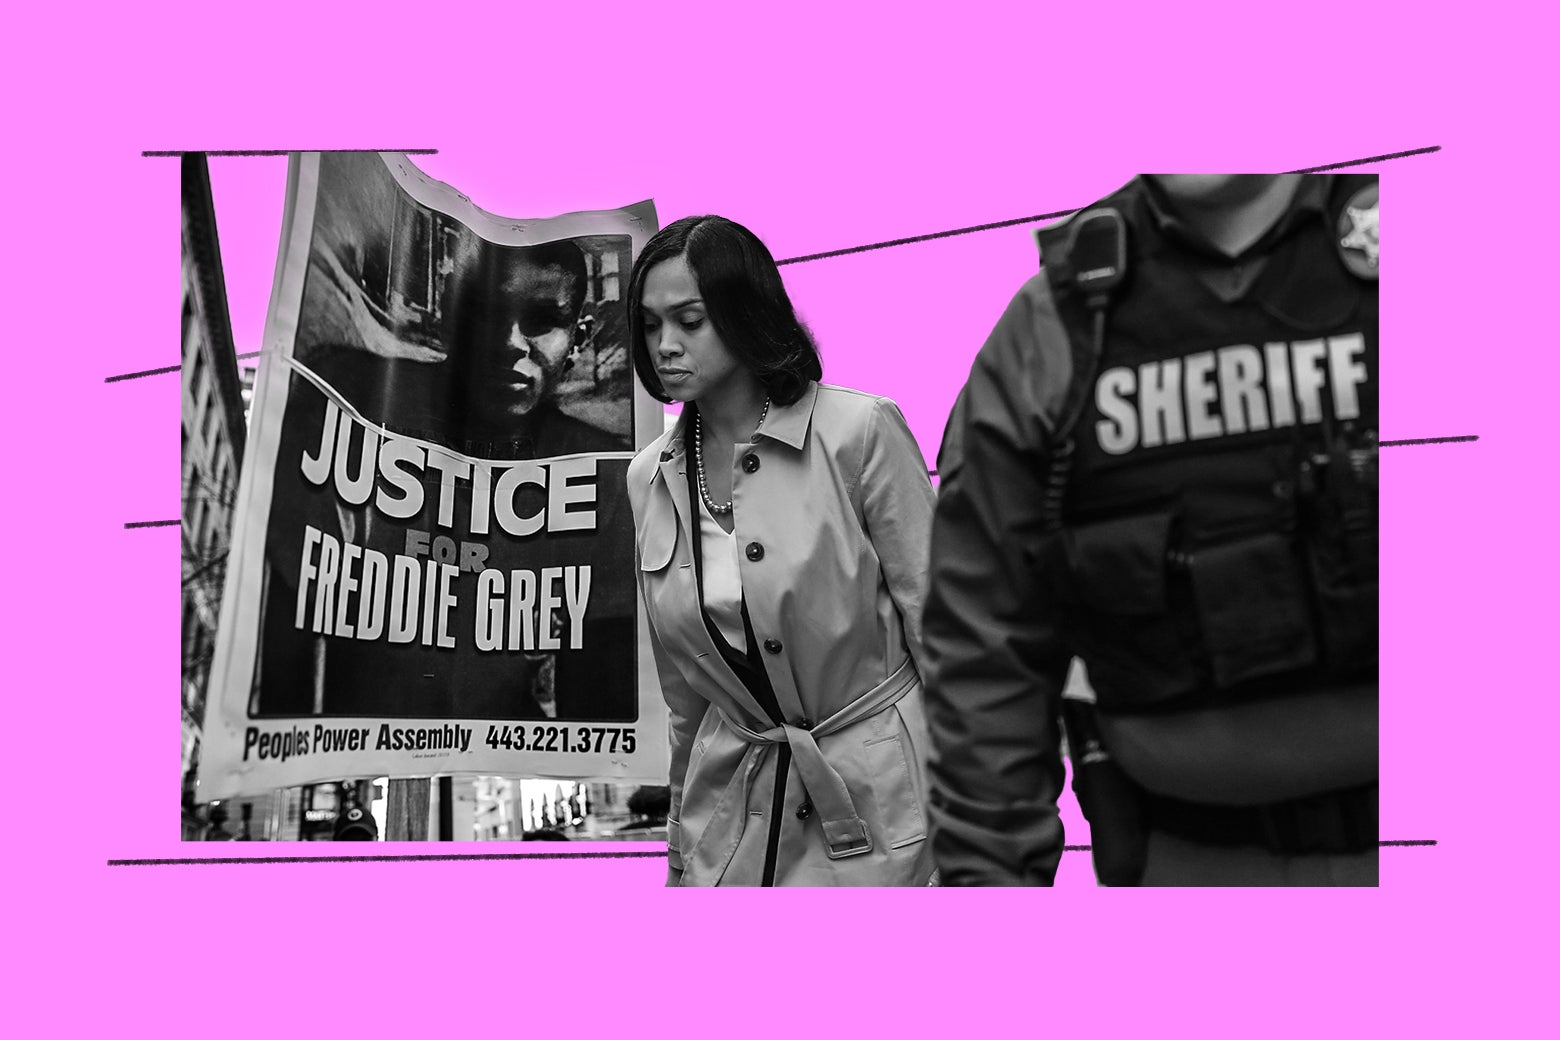 A collage of Marilyn Mosby, a sheriff, and a protester's sign that says "Justice for Freddie Gray."